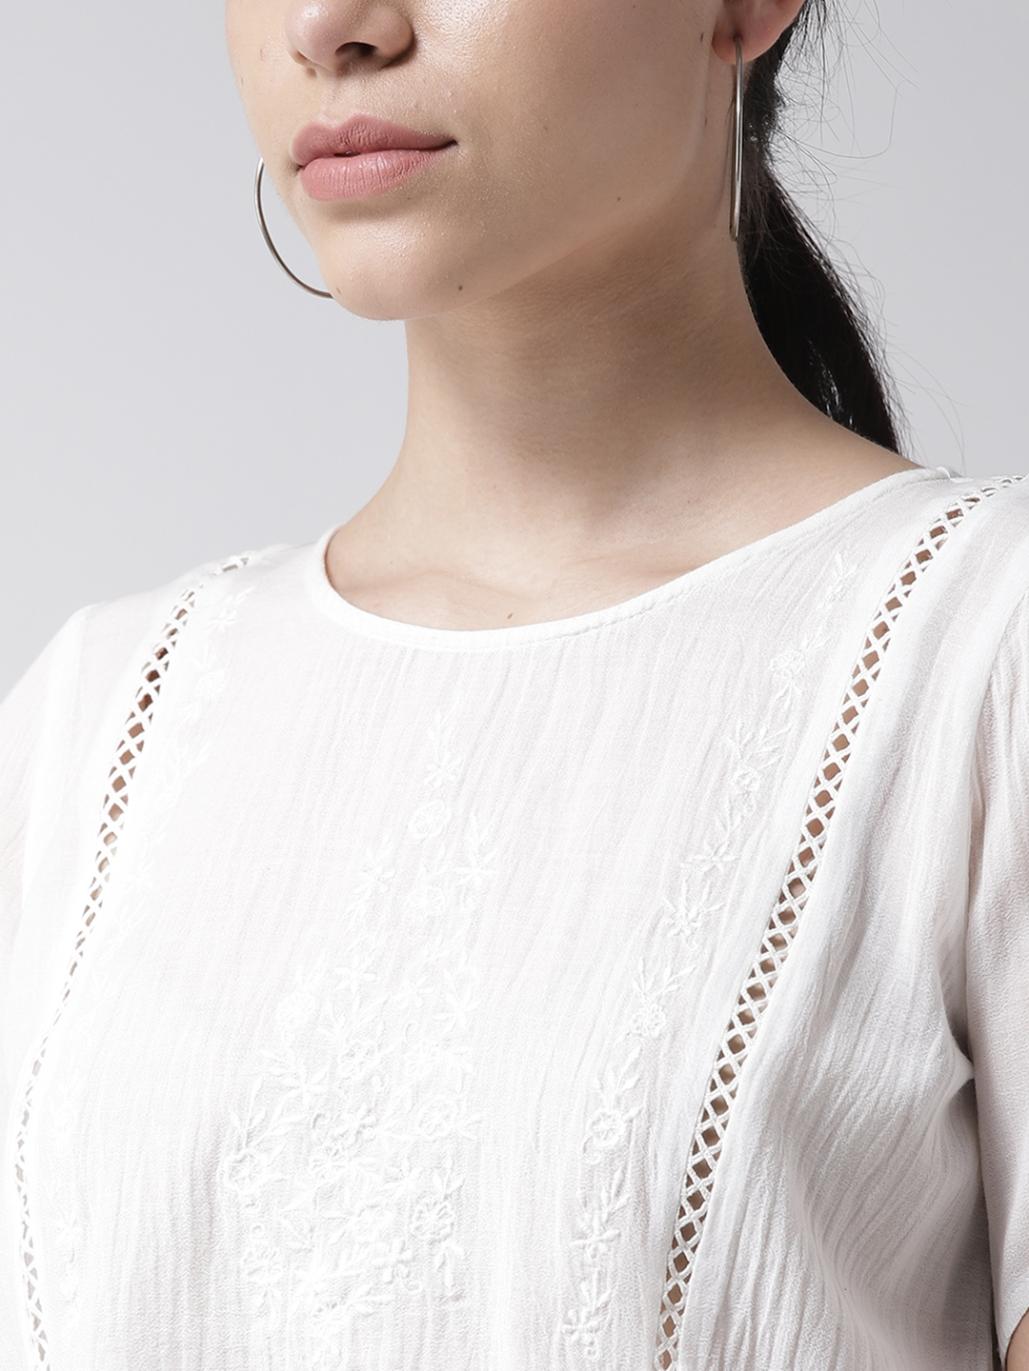 Embroidered Lace Insert Top